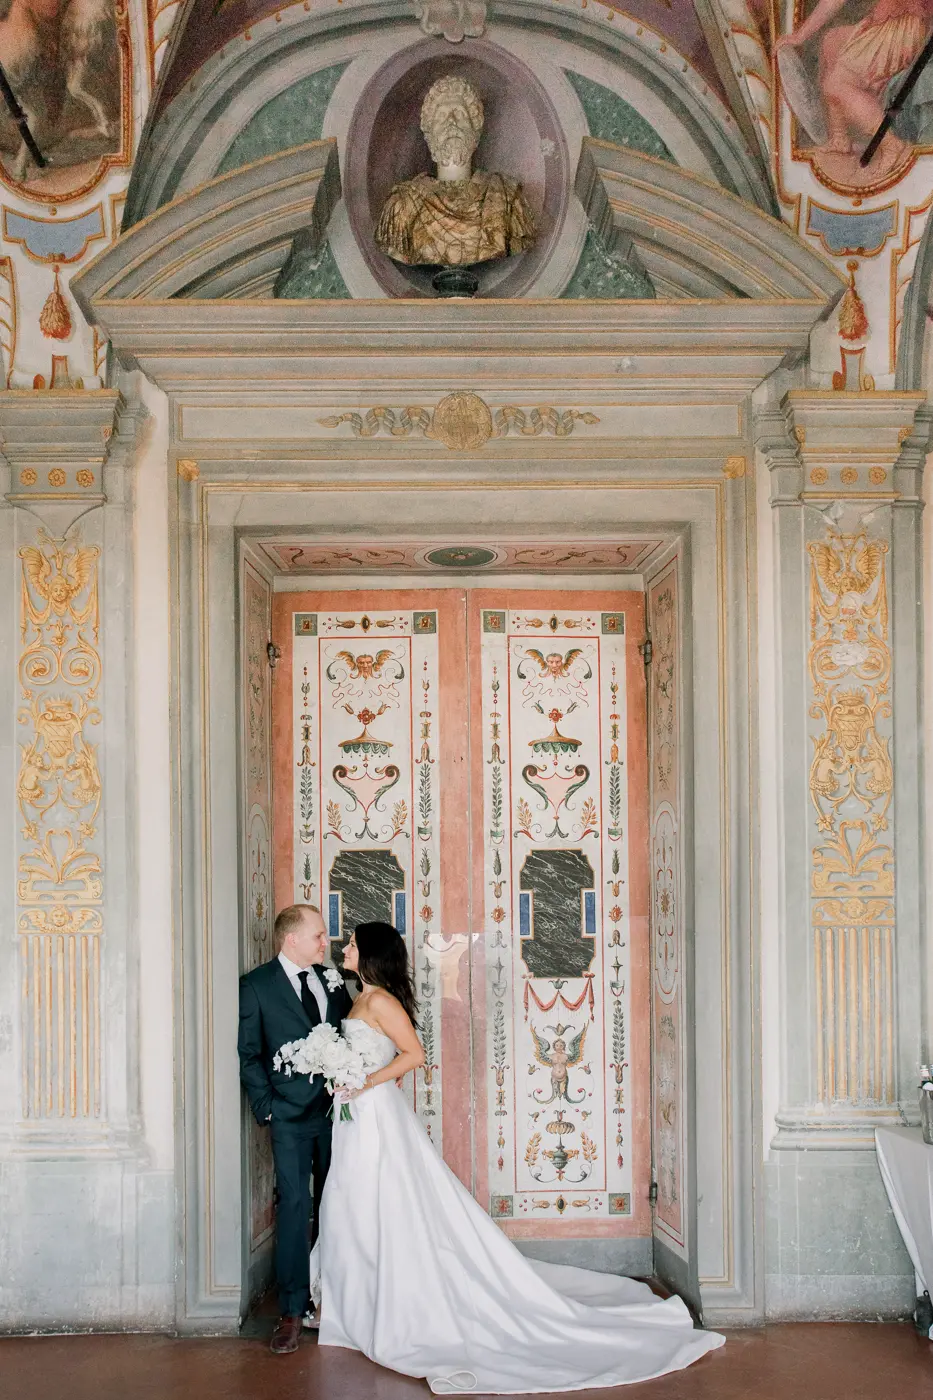 Groom and bride in front of the old door with frescoes